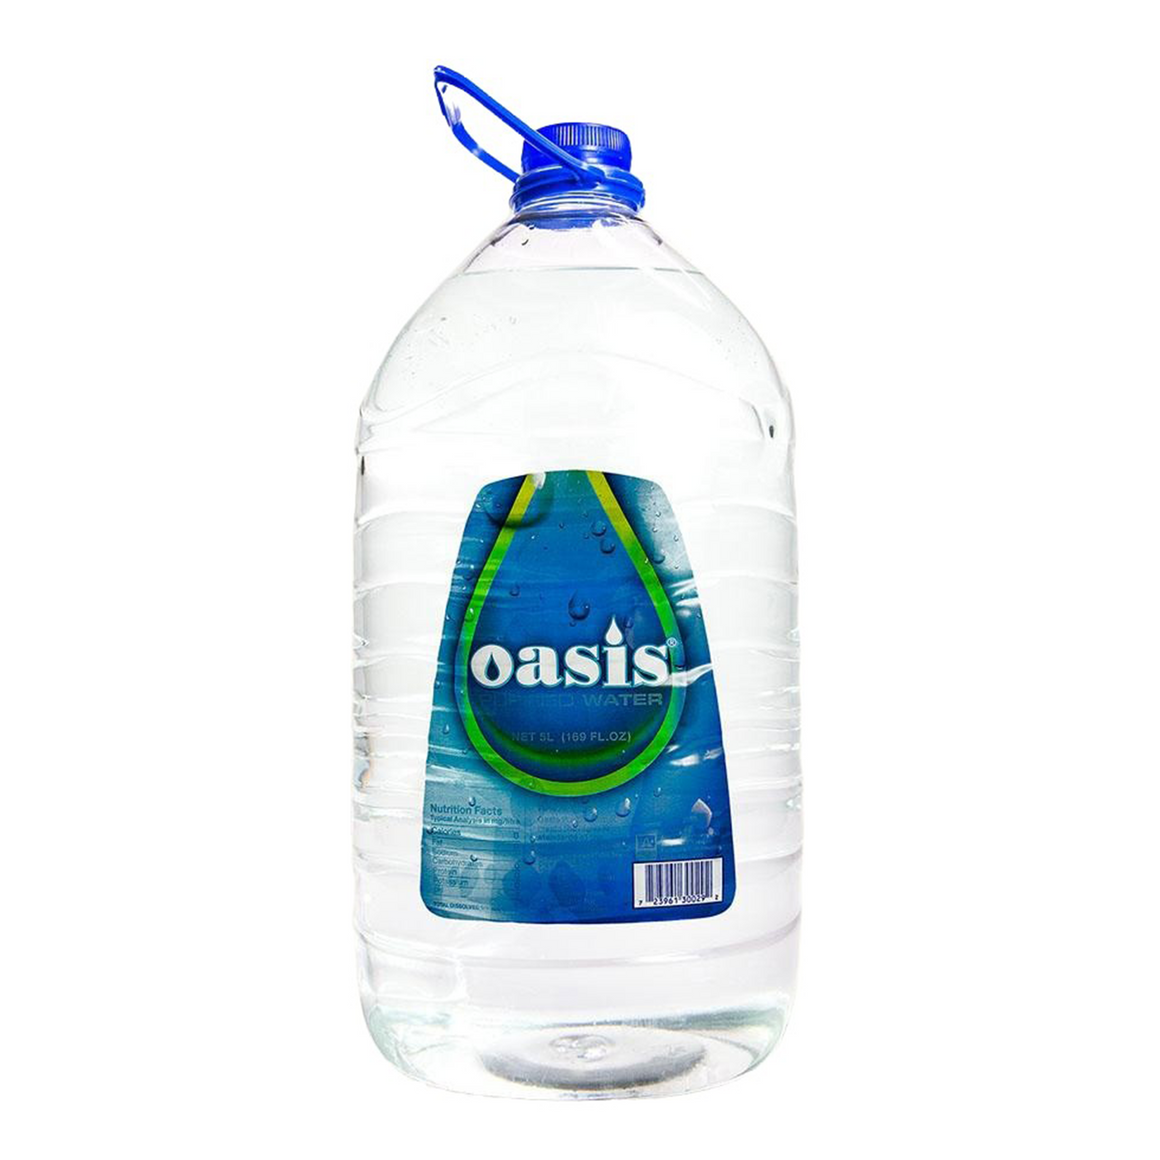 OASIS PURIFIED WATER 5 Litre - Premier Cru Retail Stores